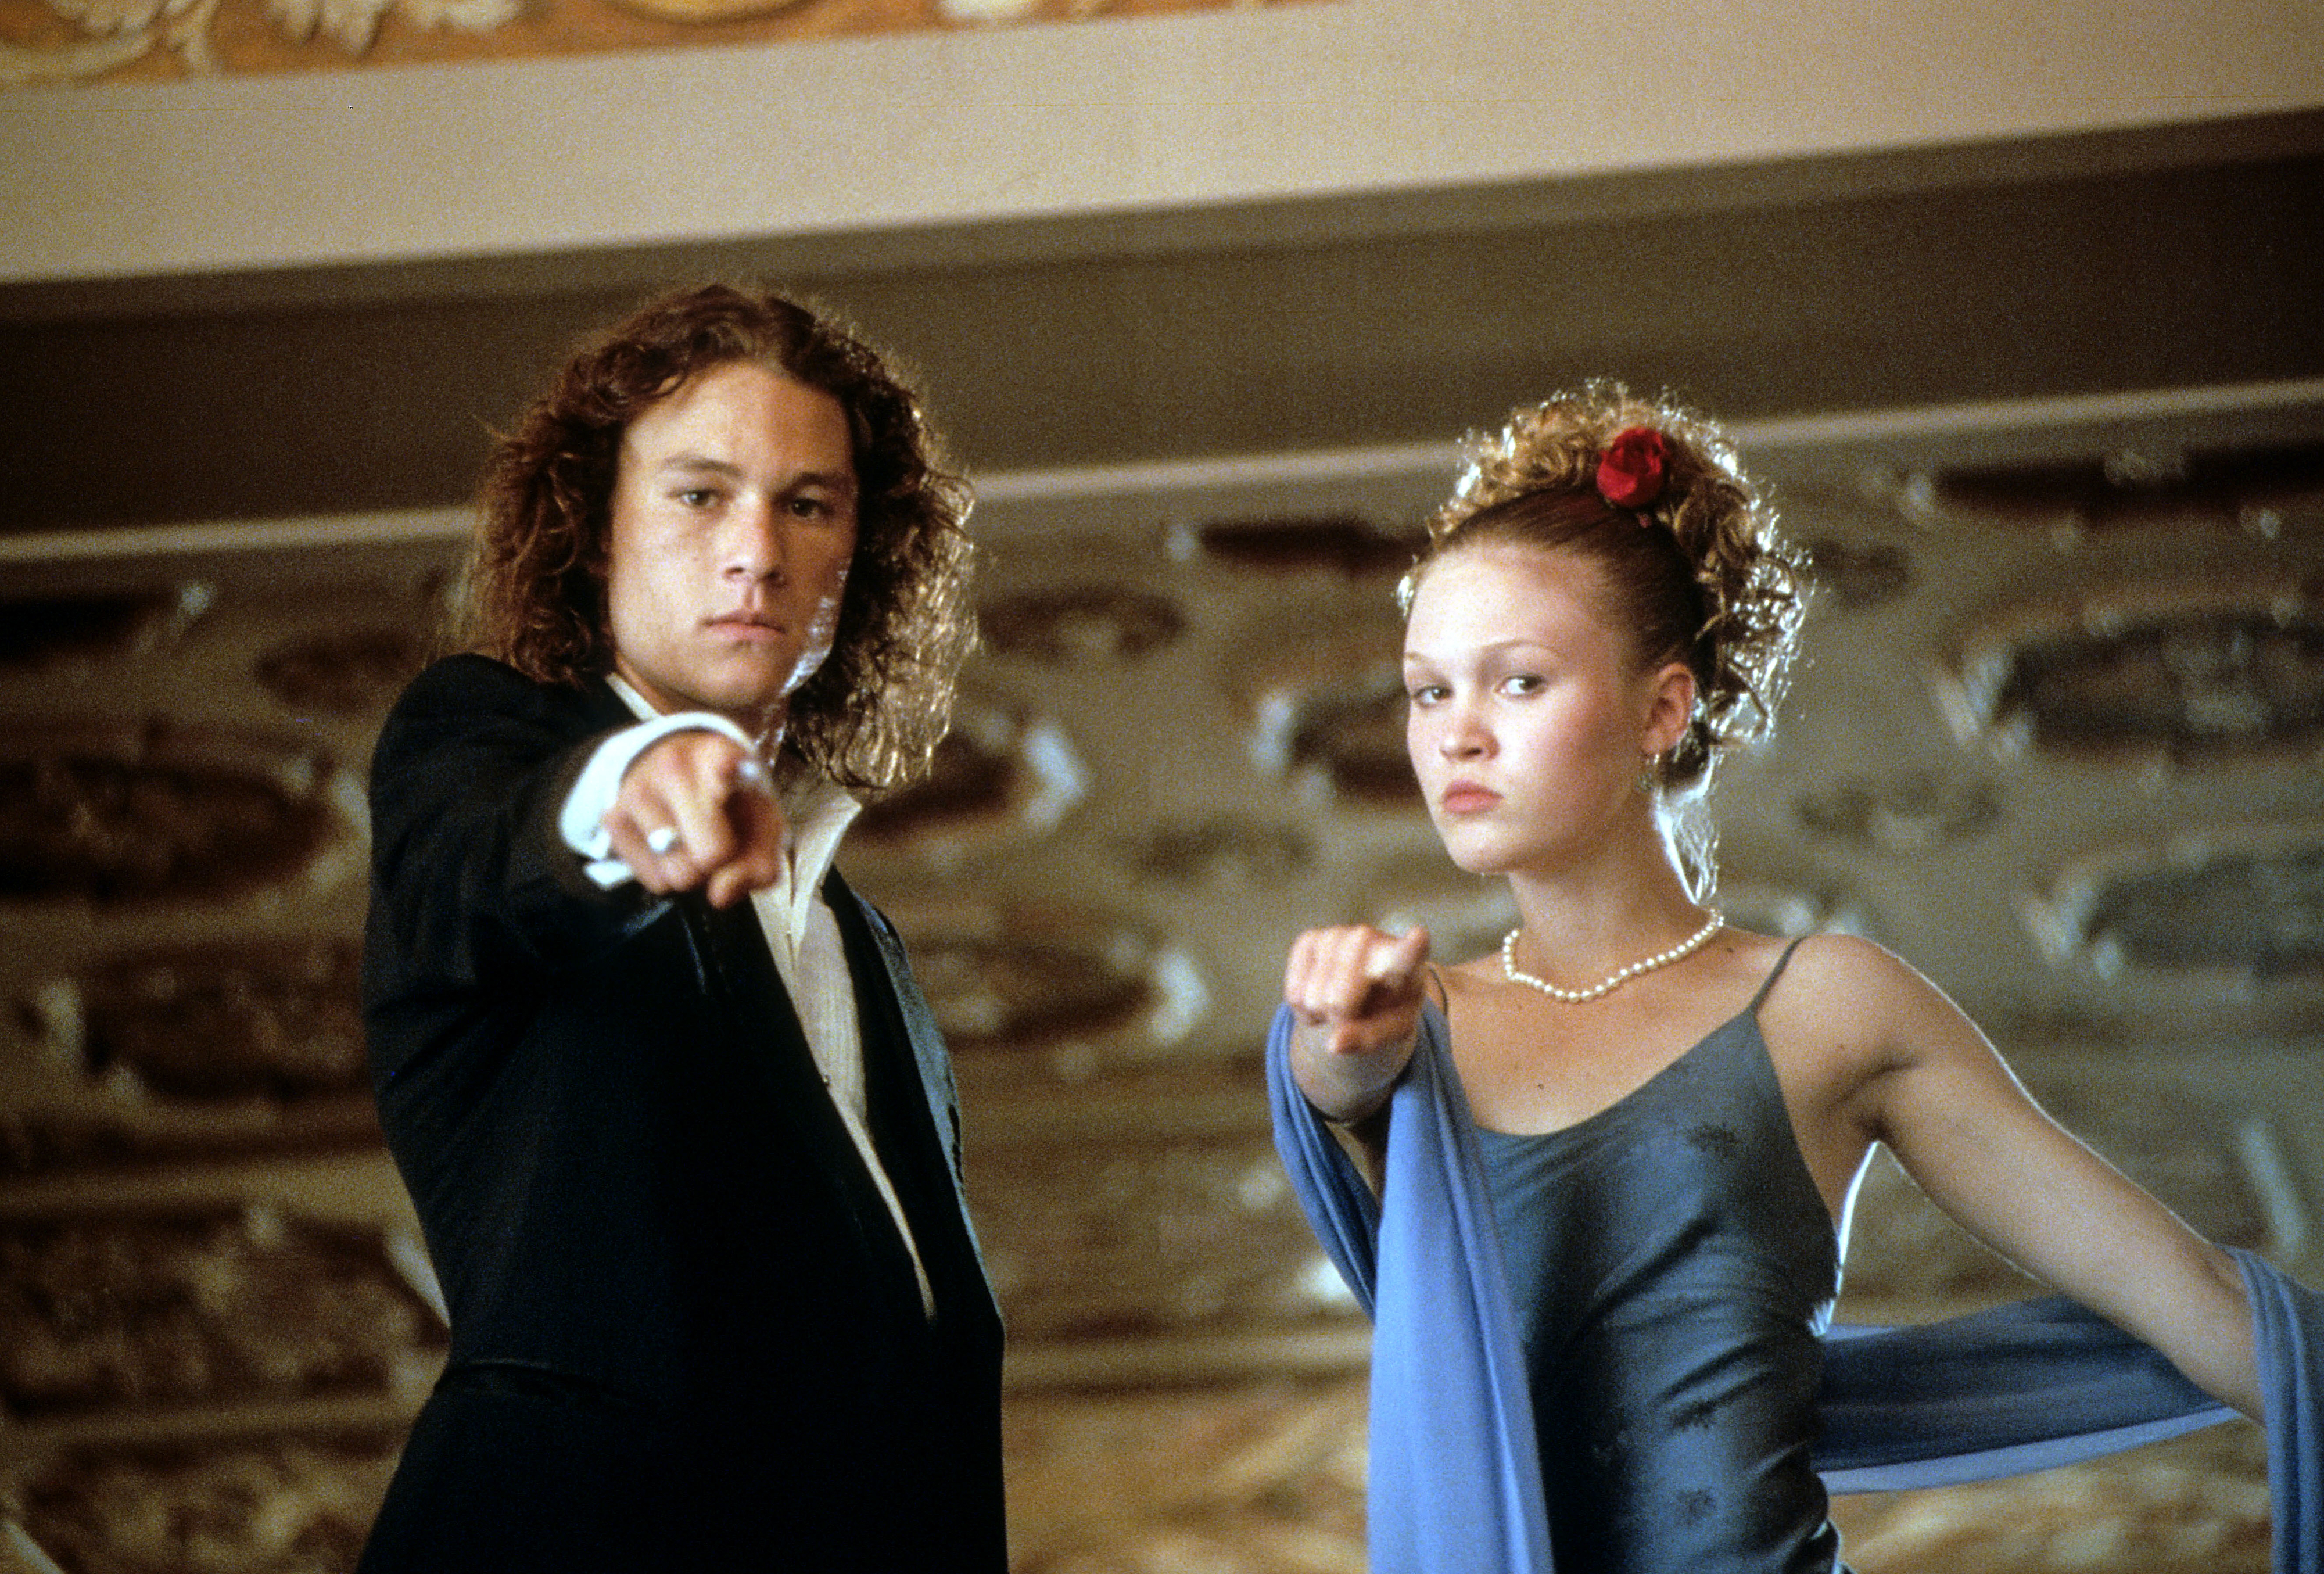 Heath Ledger and Julia Stiles in formal attire performing a dance pose